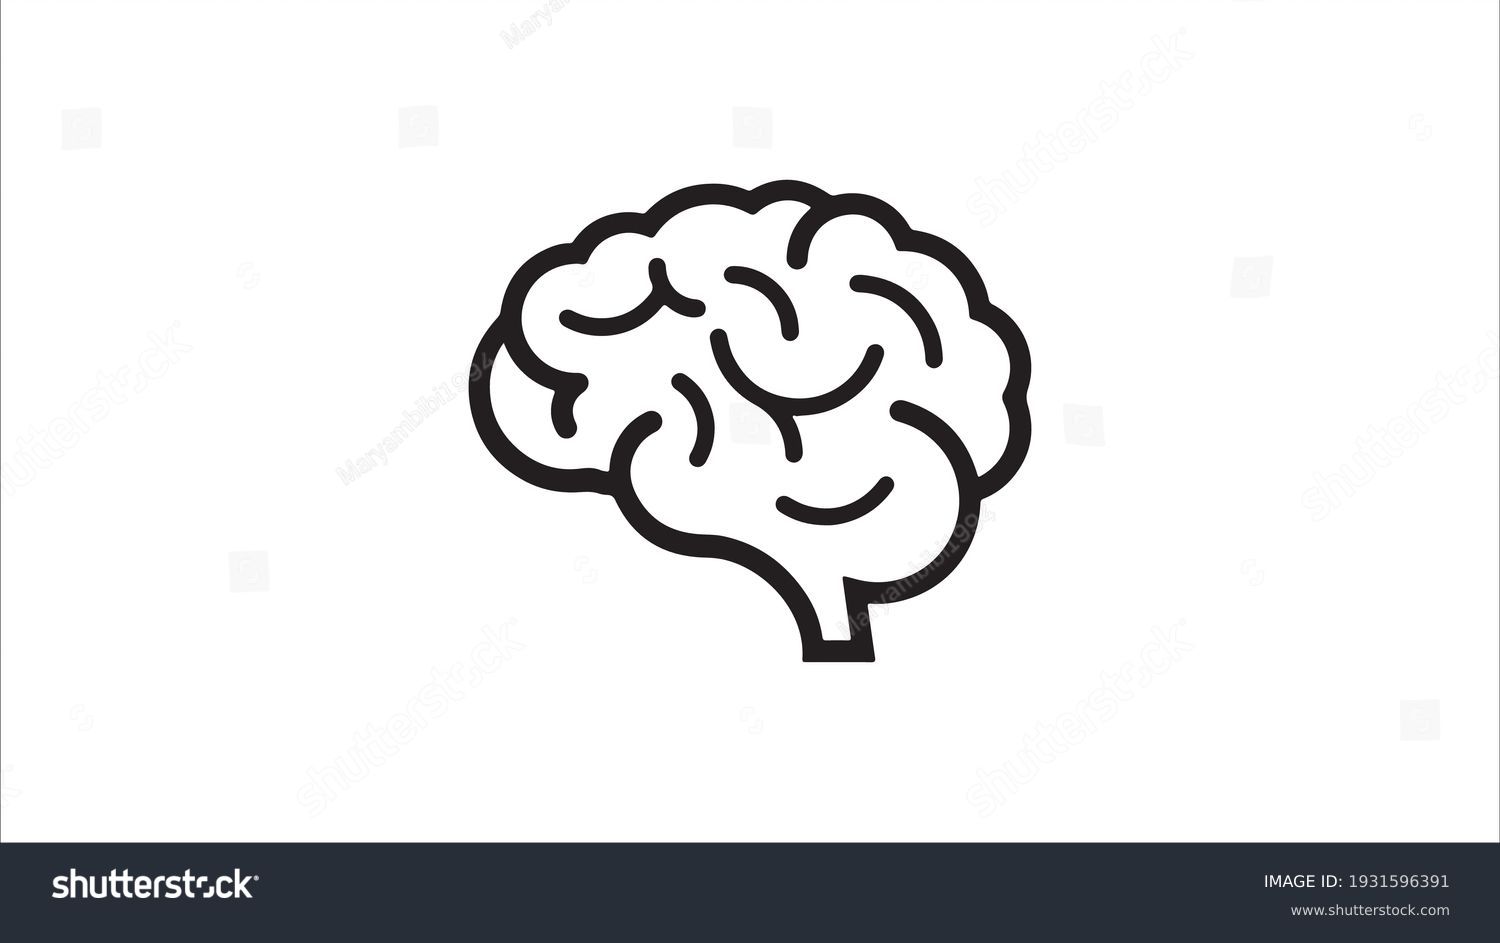 Human brain medical vector icon illustration isolated on white background #1931596391